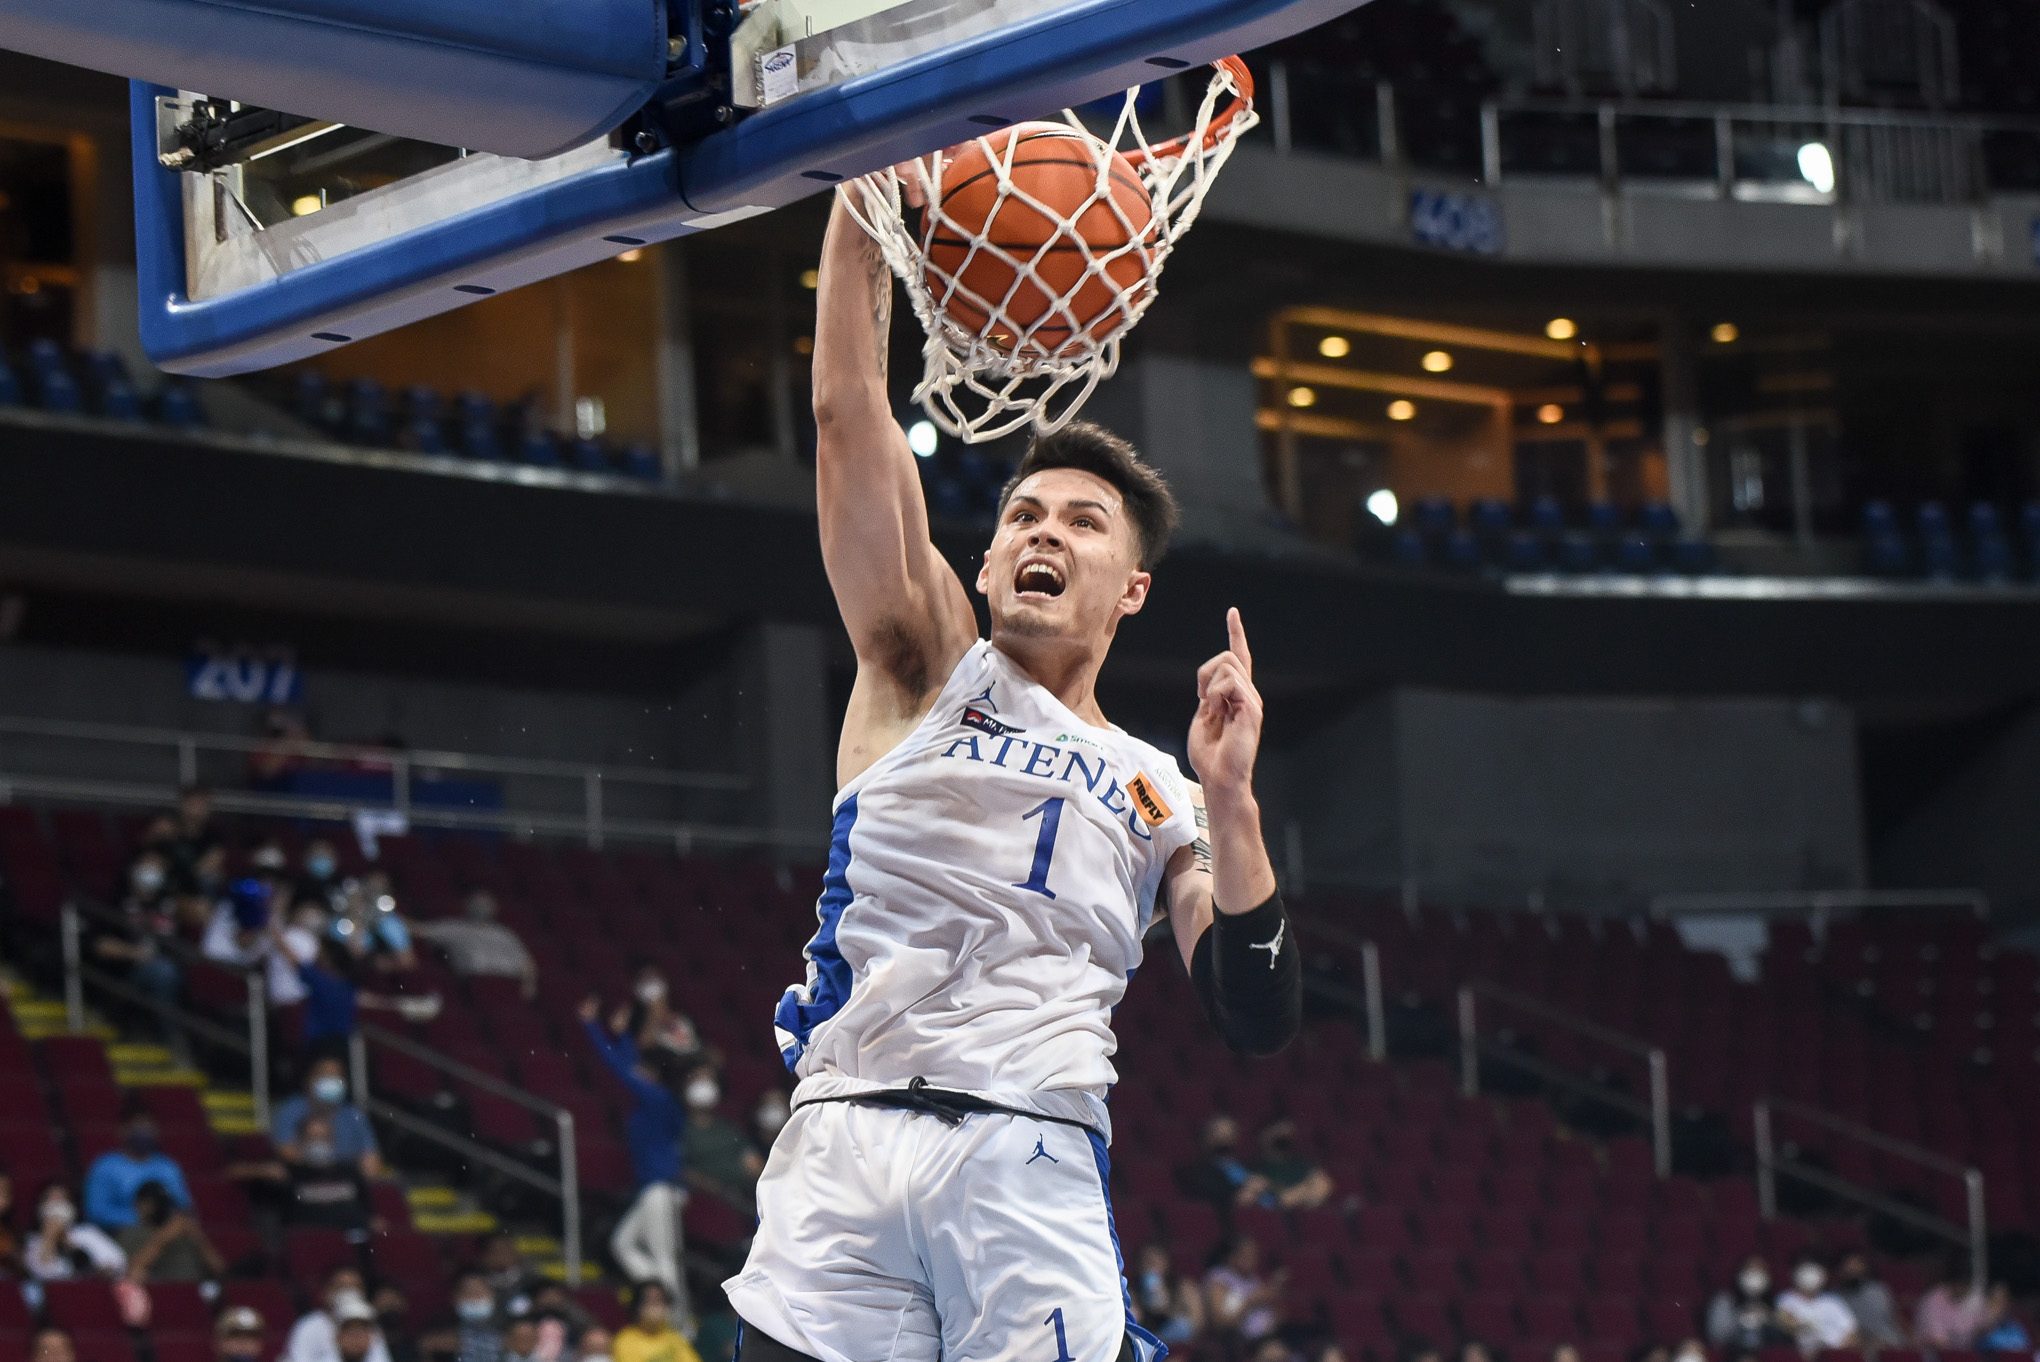 Ateneo bounces back from UP loss, vents ire on Adamson with 21-point rout